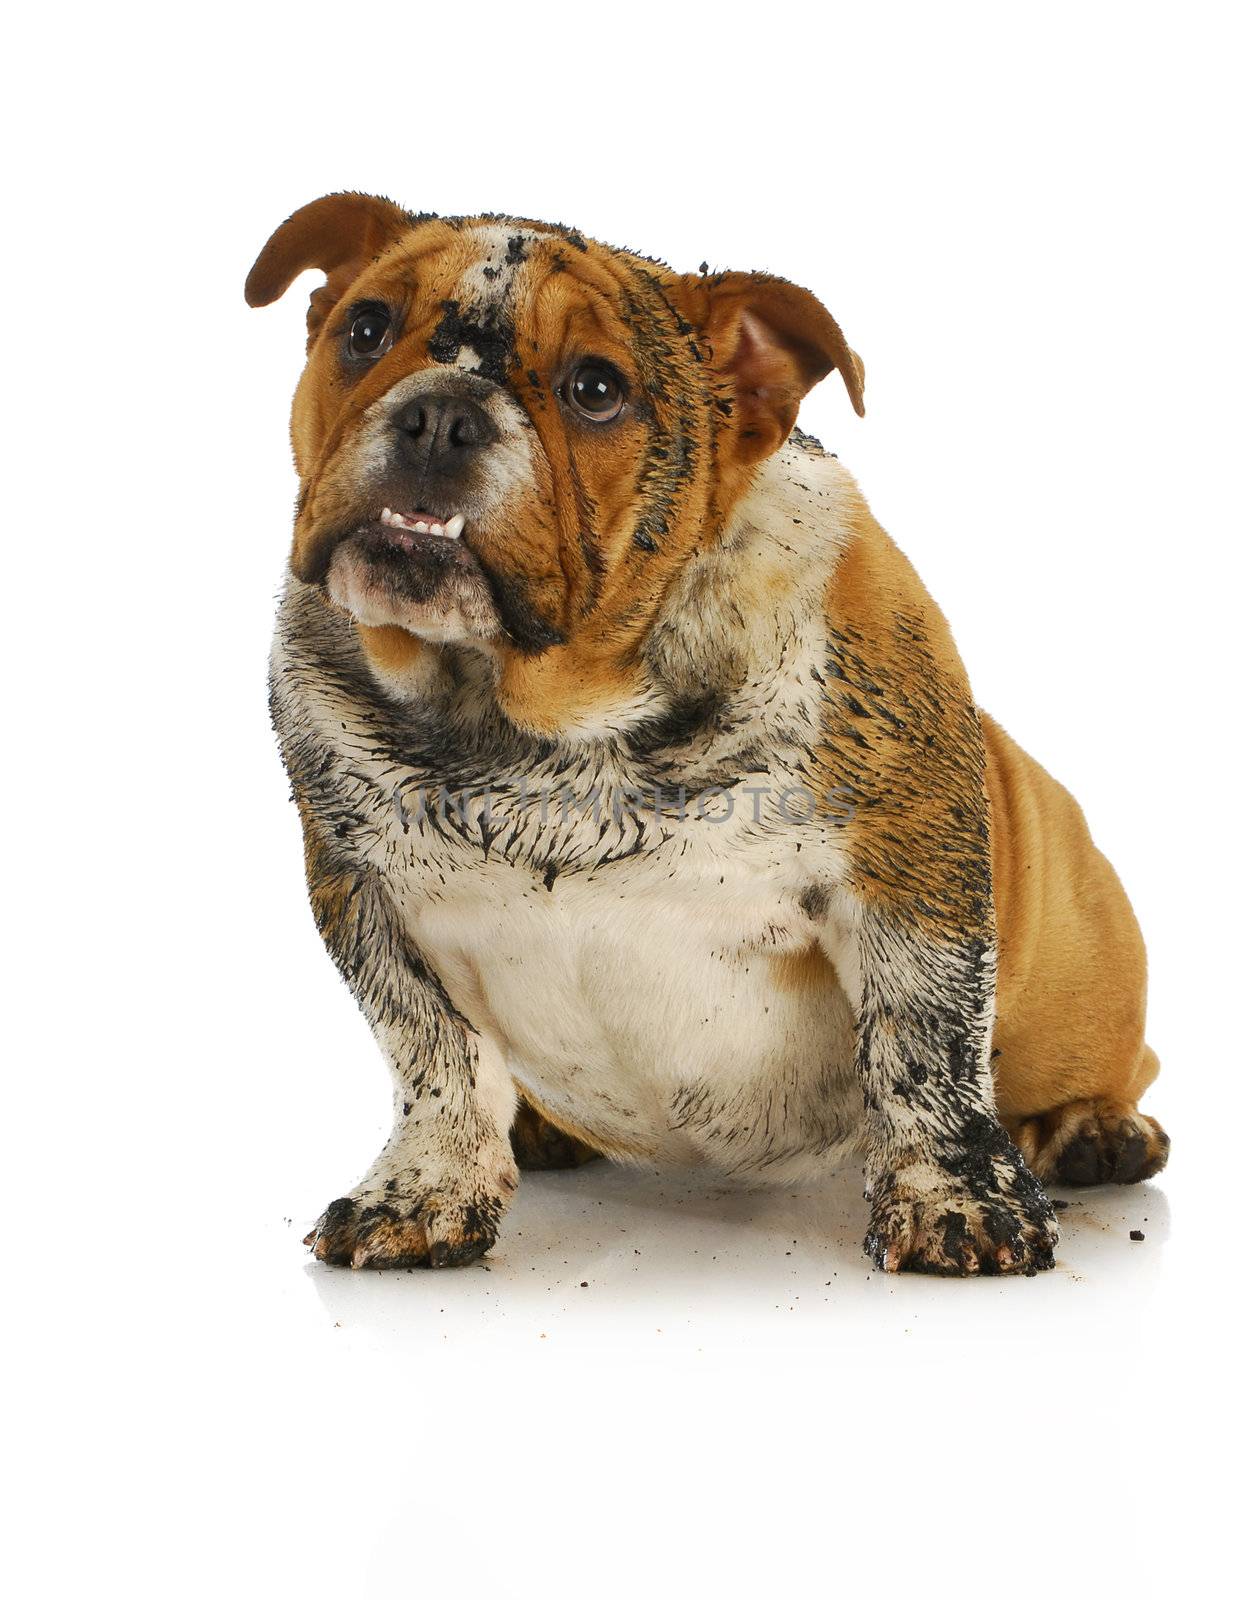 dirty dog - muddy english bulldog looking up with reflection on white background